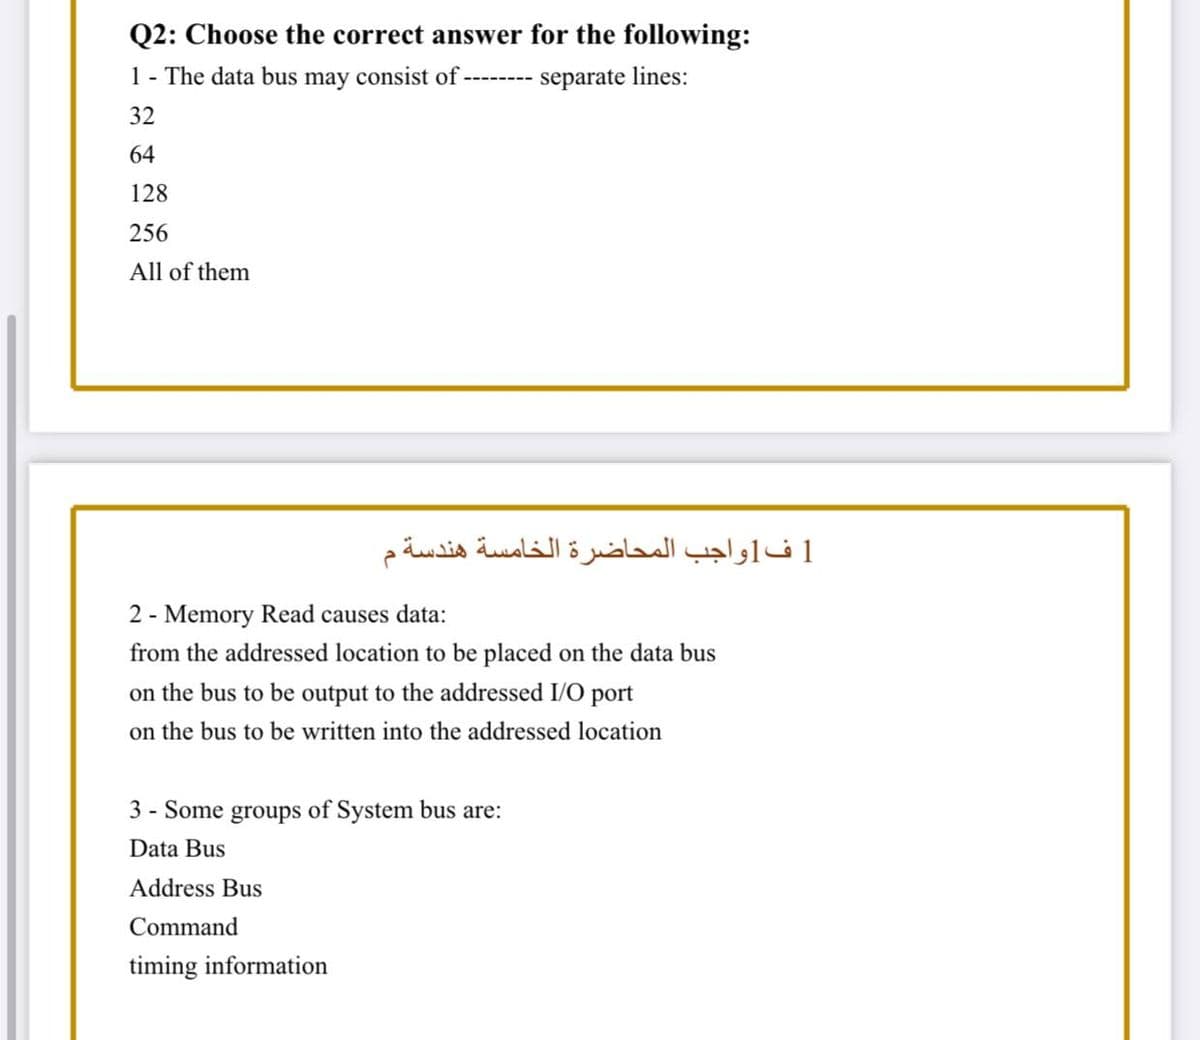 Q2: Choose the correct answer for the following:
1 - The data bus may consist of --------
separate lines:
32
64
128
256
All of them
1 ف 1واجب المحاضرة الخامسة هندسة م
2 - Memory Read causes data:
from the addressed location to be placed on the data bus
on the bus to be output to the addressed I/O port
on the bus to be written into the addressed location
3 - Some groups of System bus are:
Data Bus
Address Bus
Command
timing information
